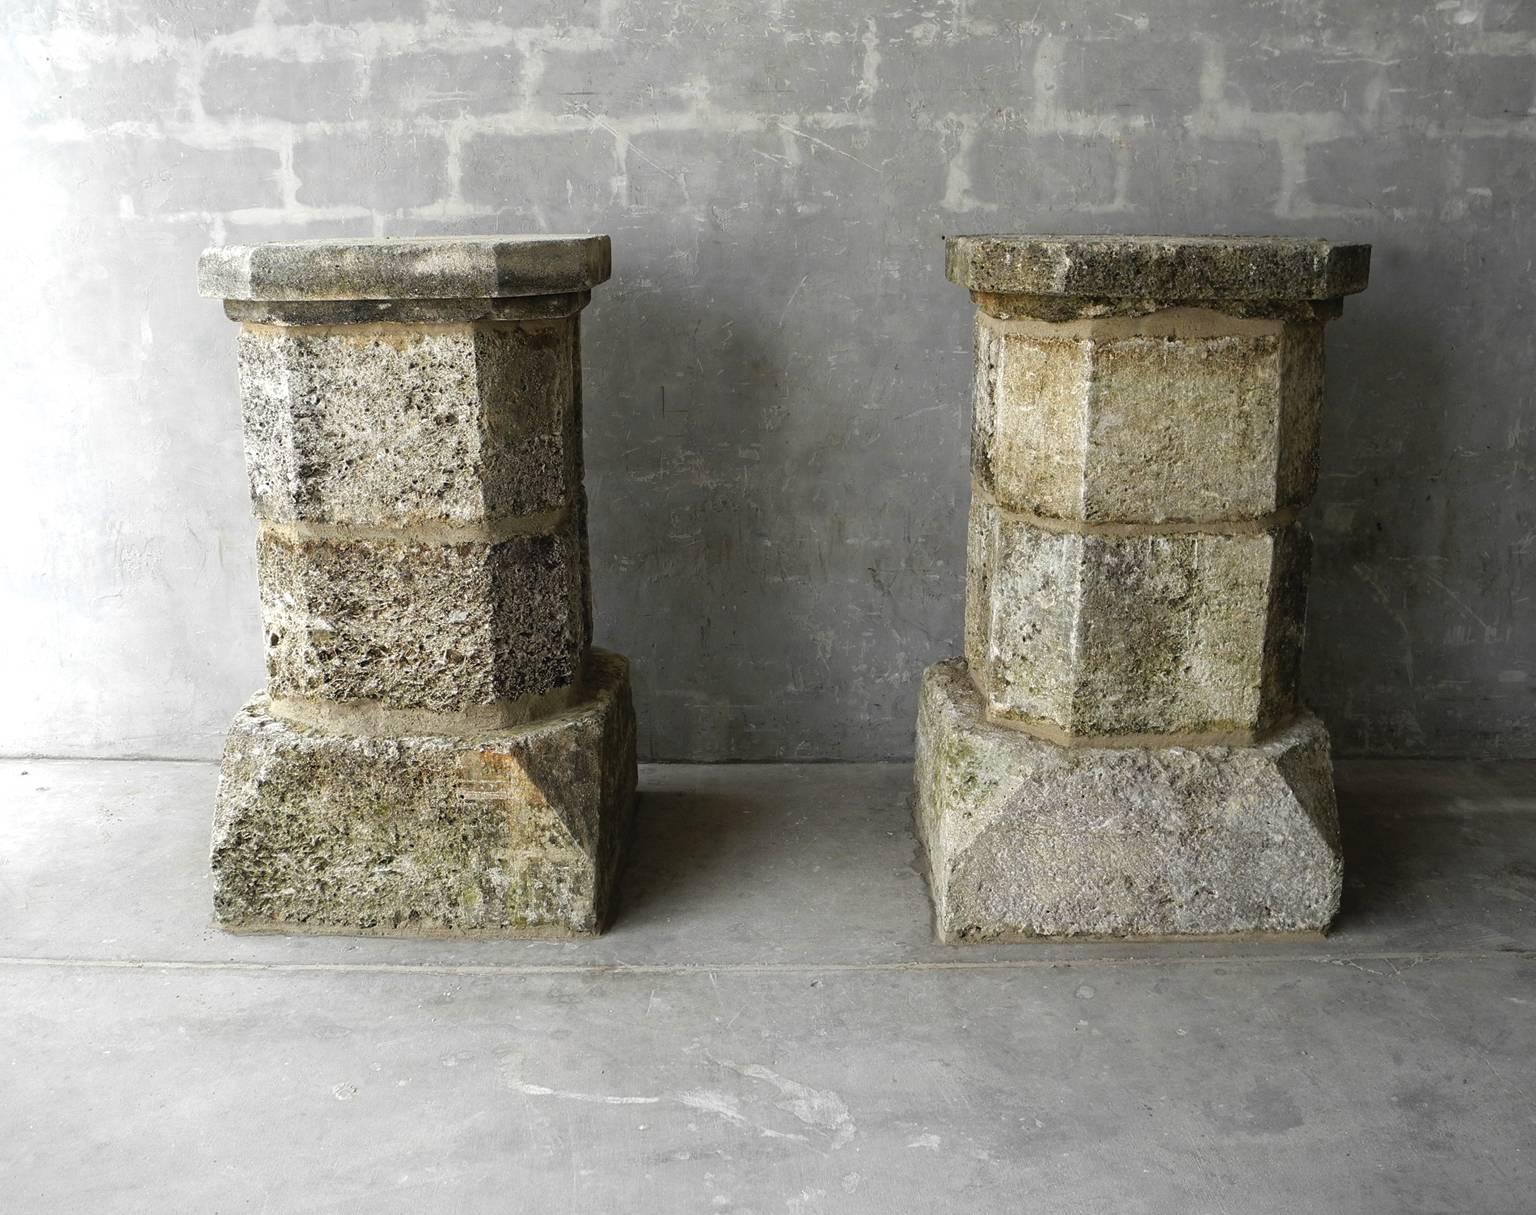 This pair of 17th century stone columns are from the entrance to a domain near Bezier, France. They are made of limestone and have a wonderful mossy patina because of the porousness. They are thick and short - they can flank an entrance or stand as